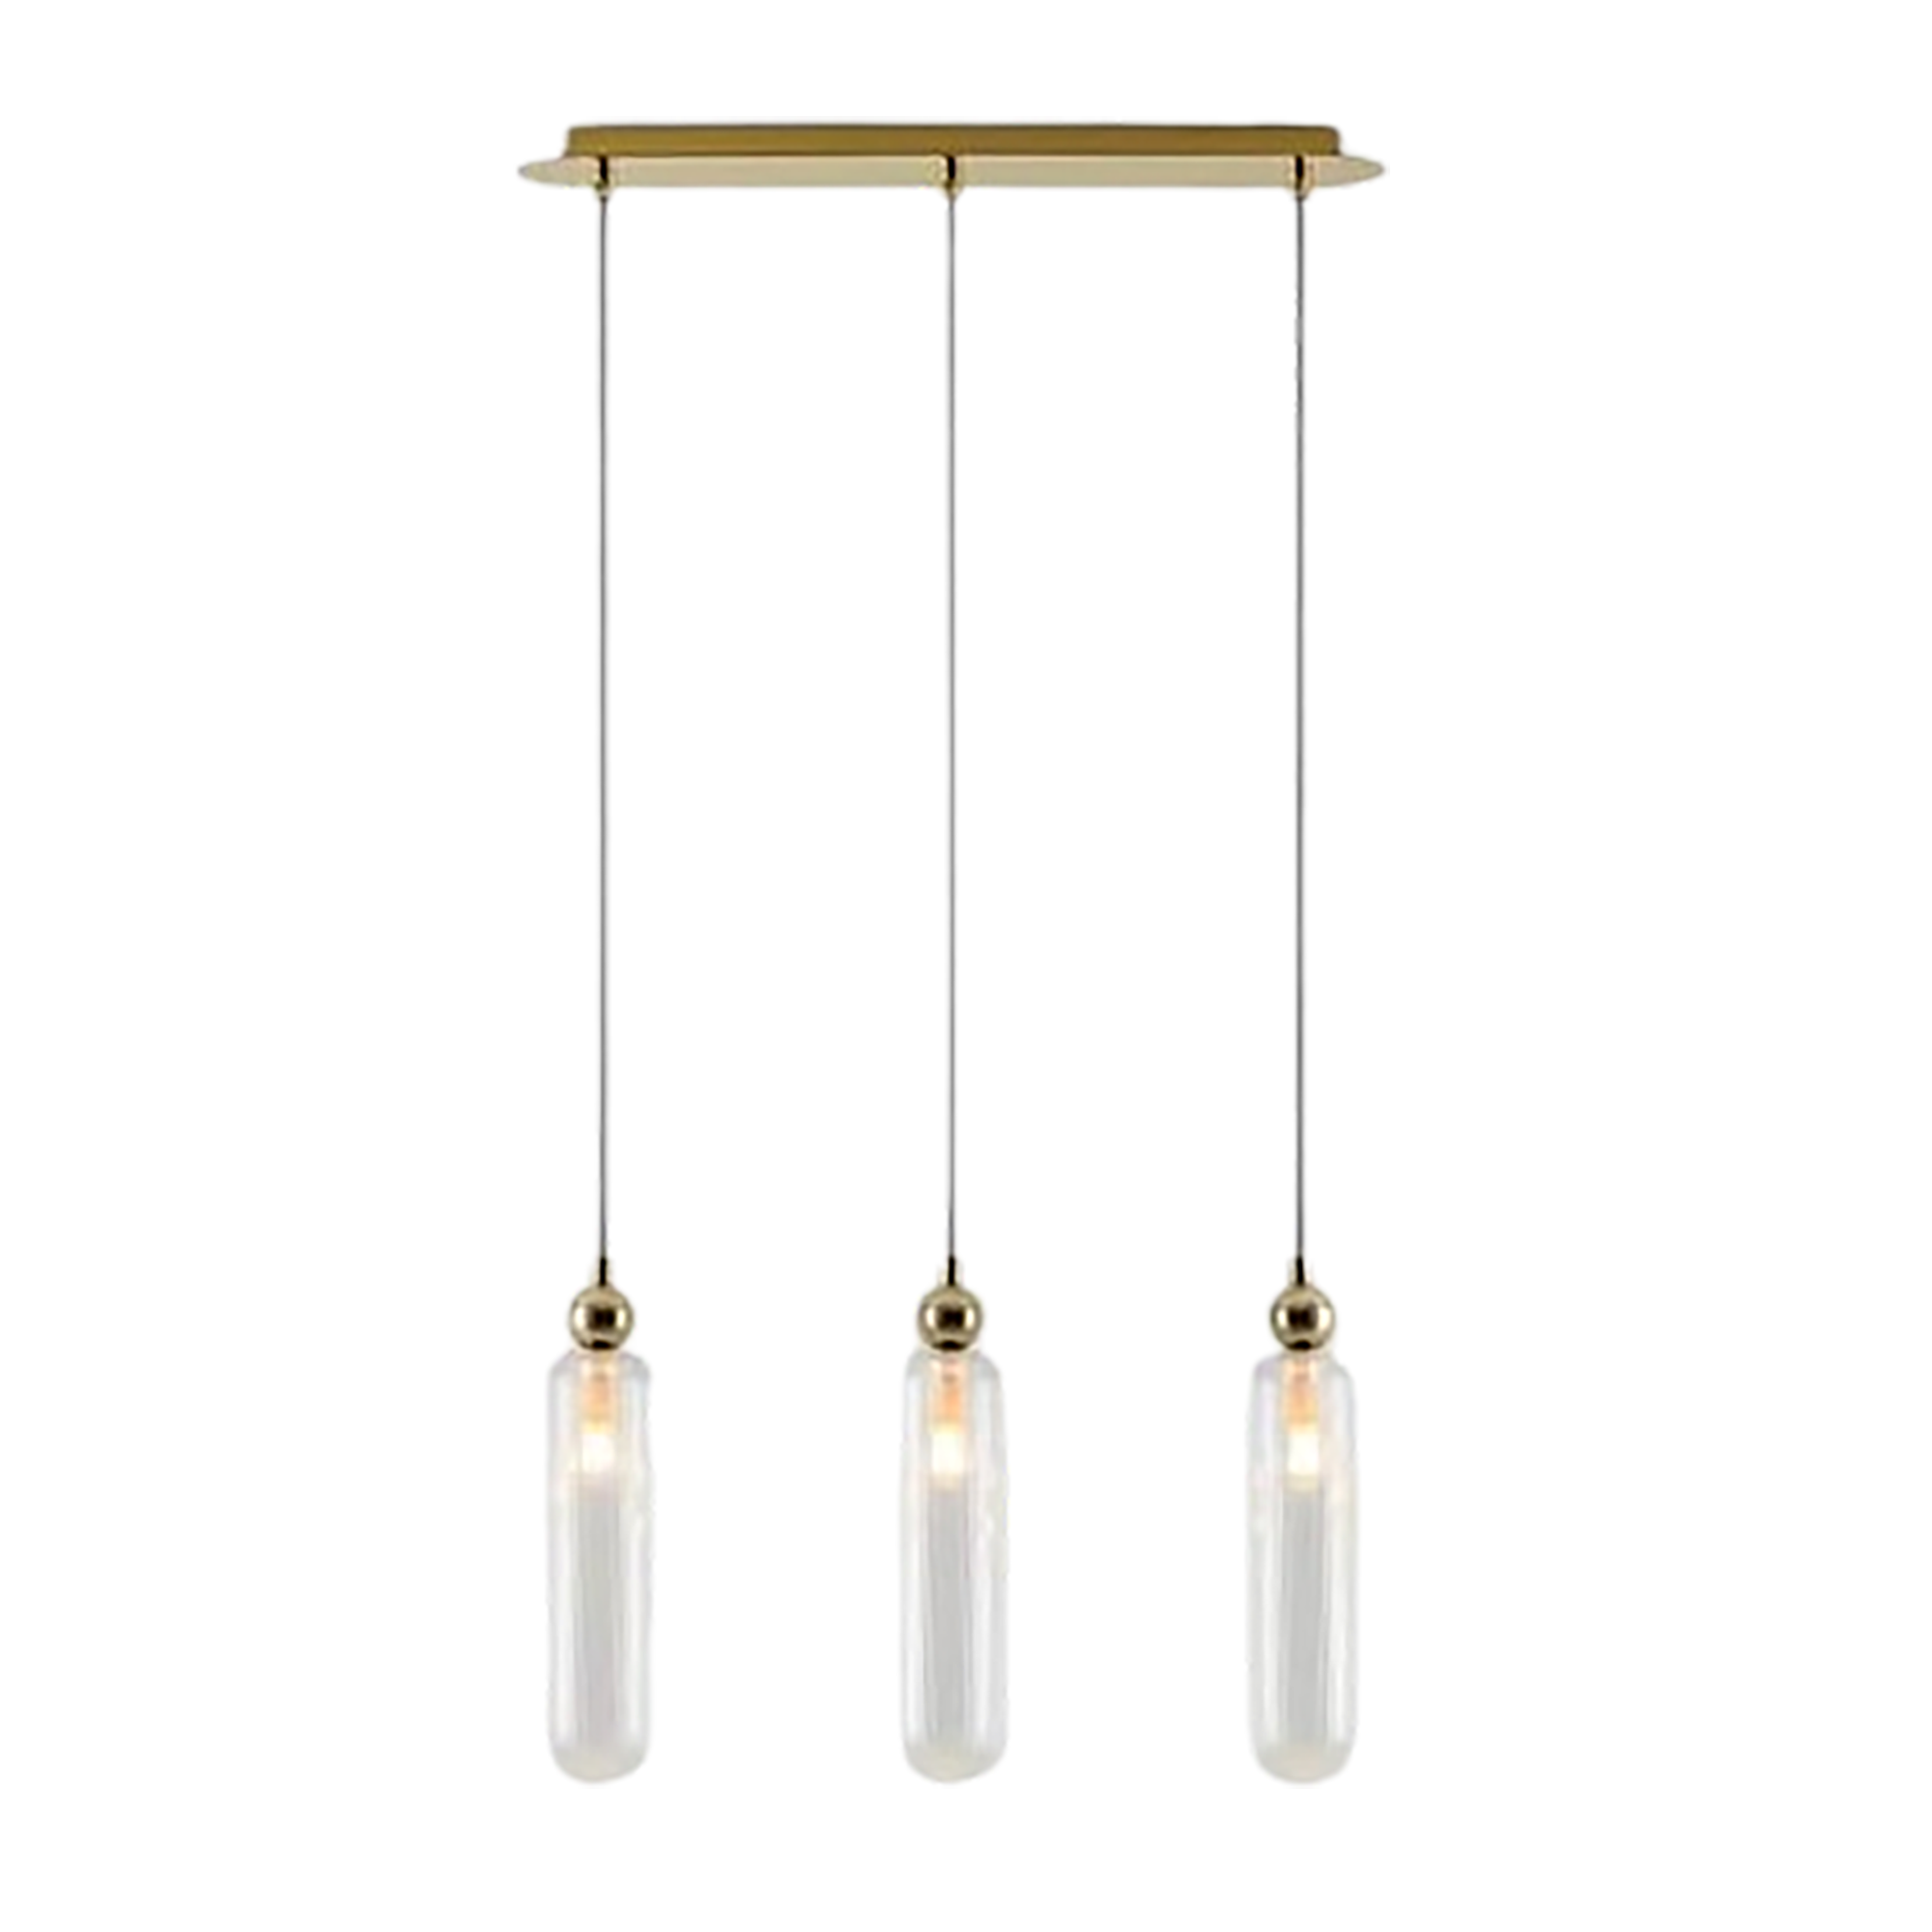 Gold ribbed glass pendant lights